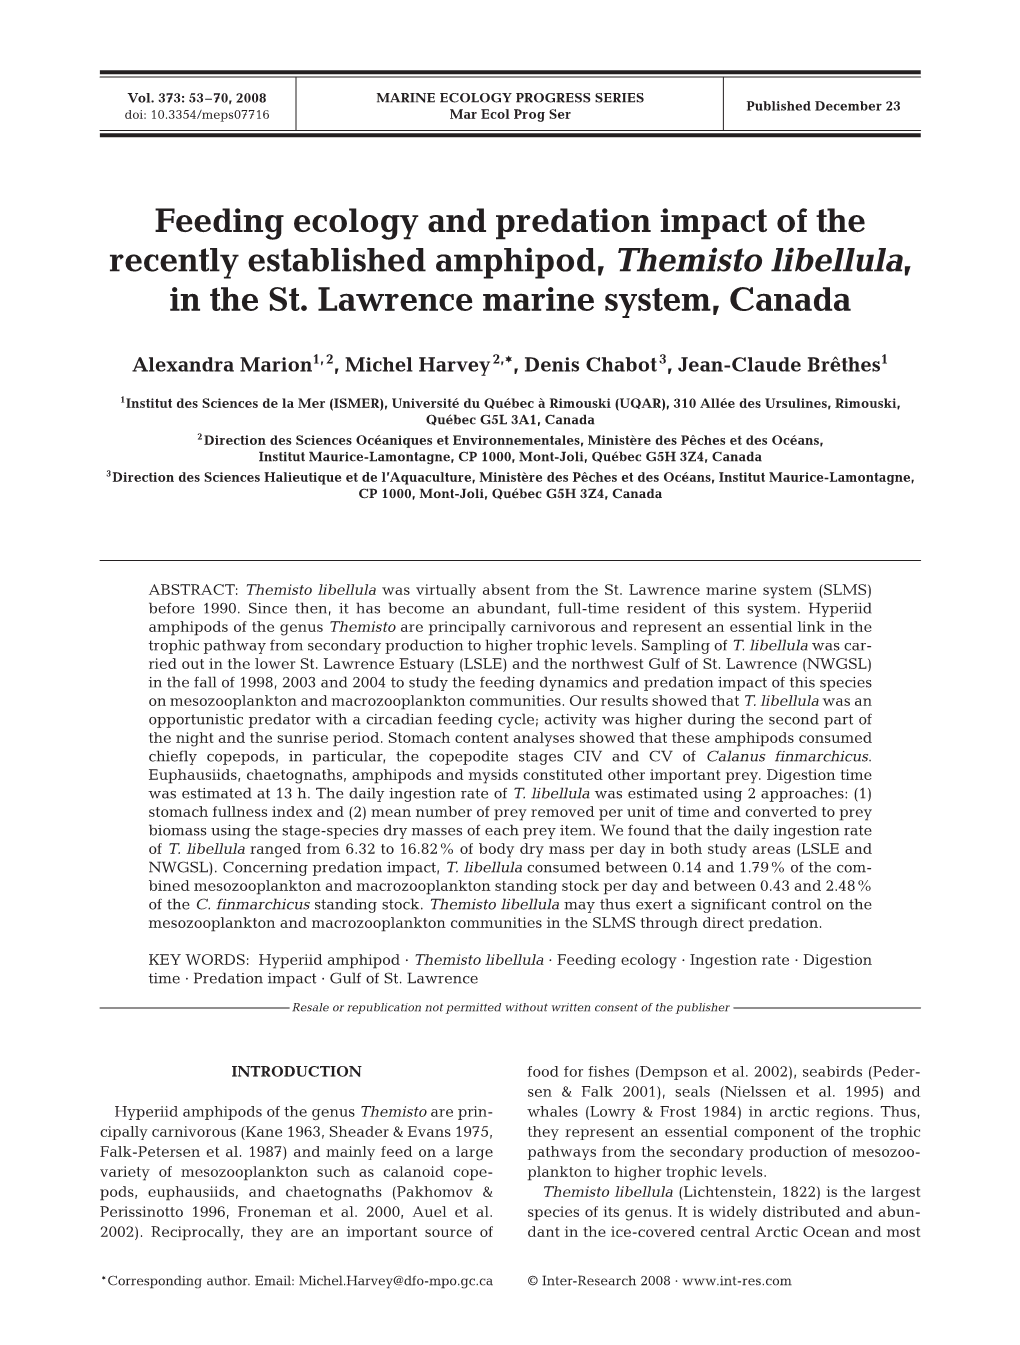 Feeding Ecology and Predation Impact of the Recently Established Amphipod, Themisto Libellula, in the St